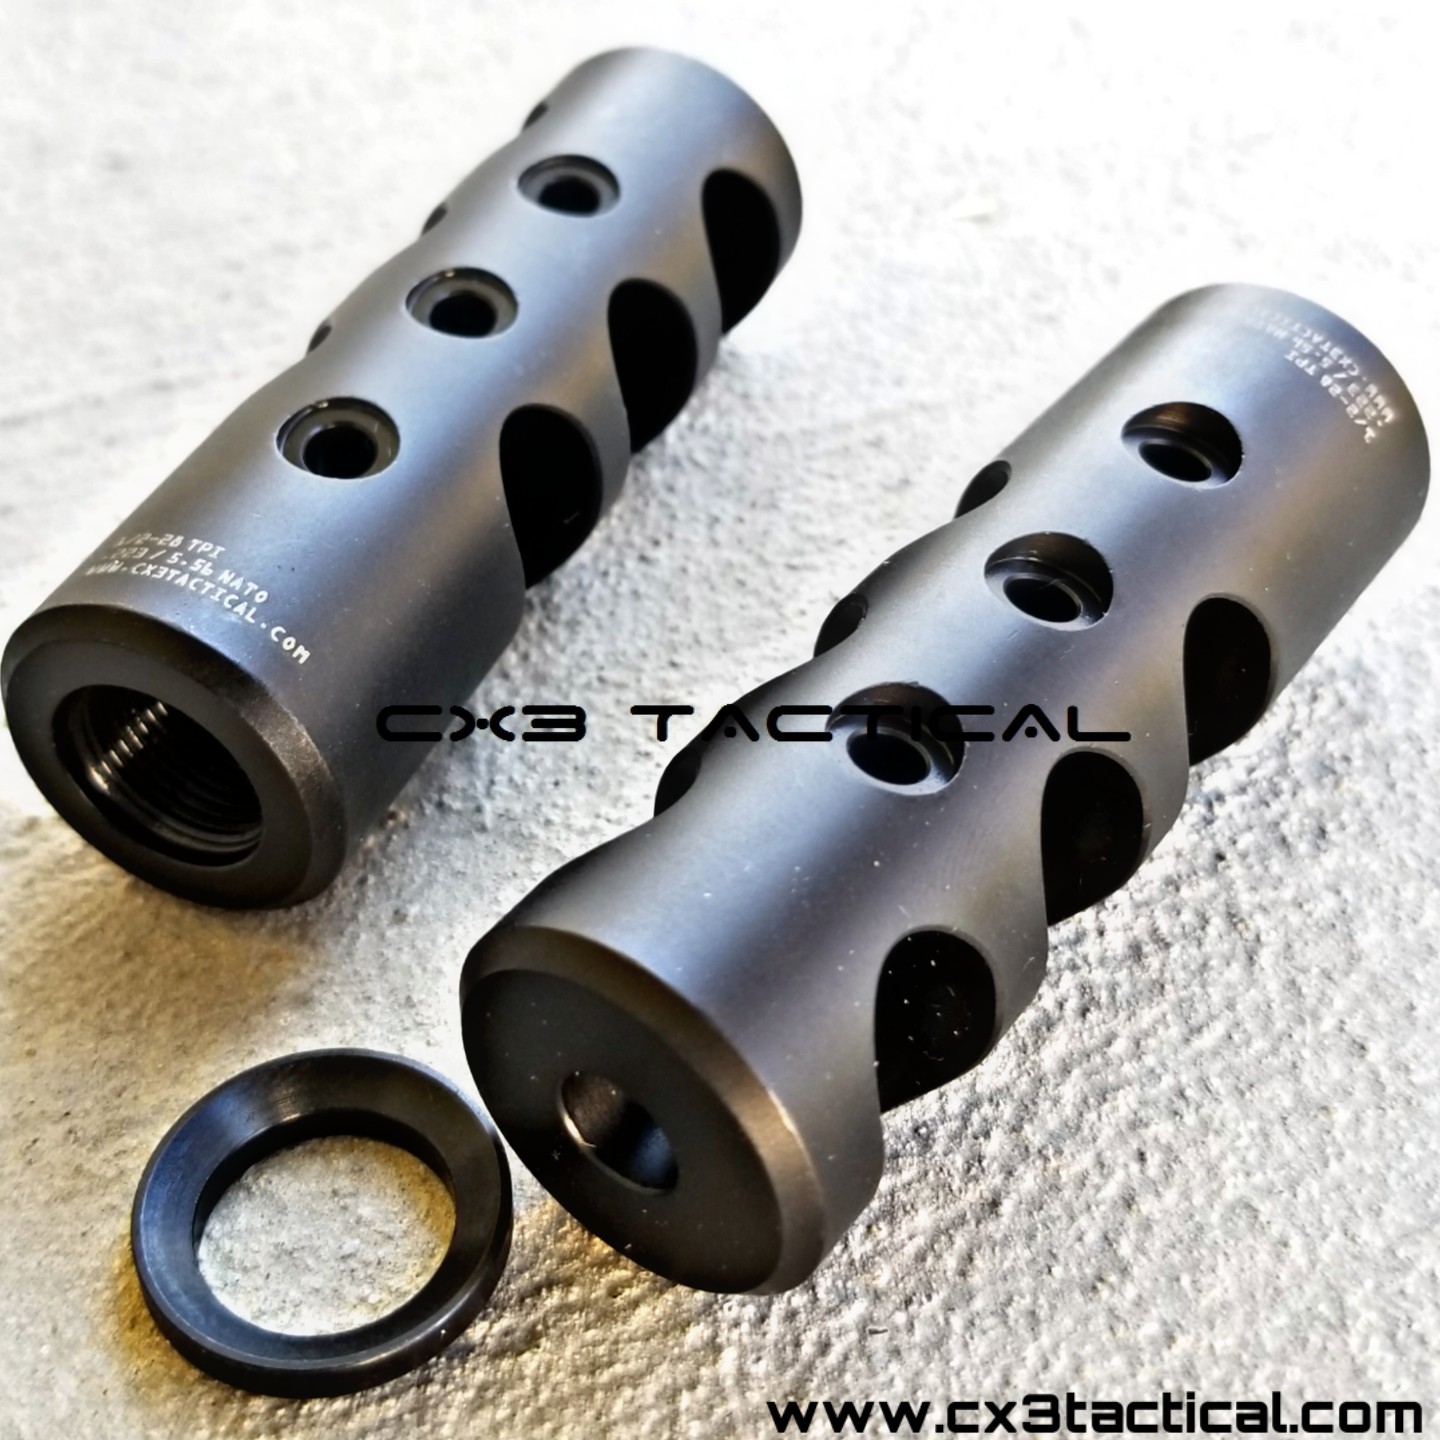 New 1/2-28 Pitch Thread Muzzle Brake With Free Crush Washer For .223 